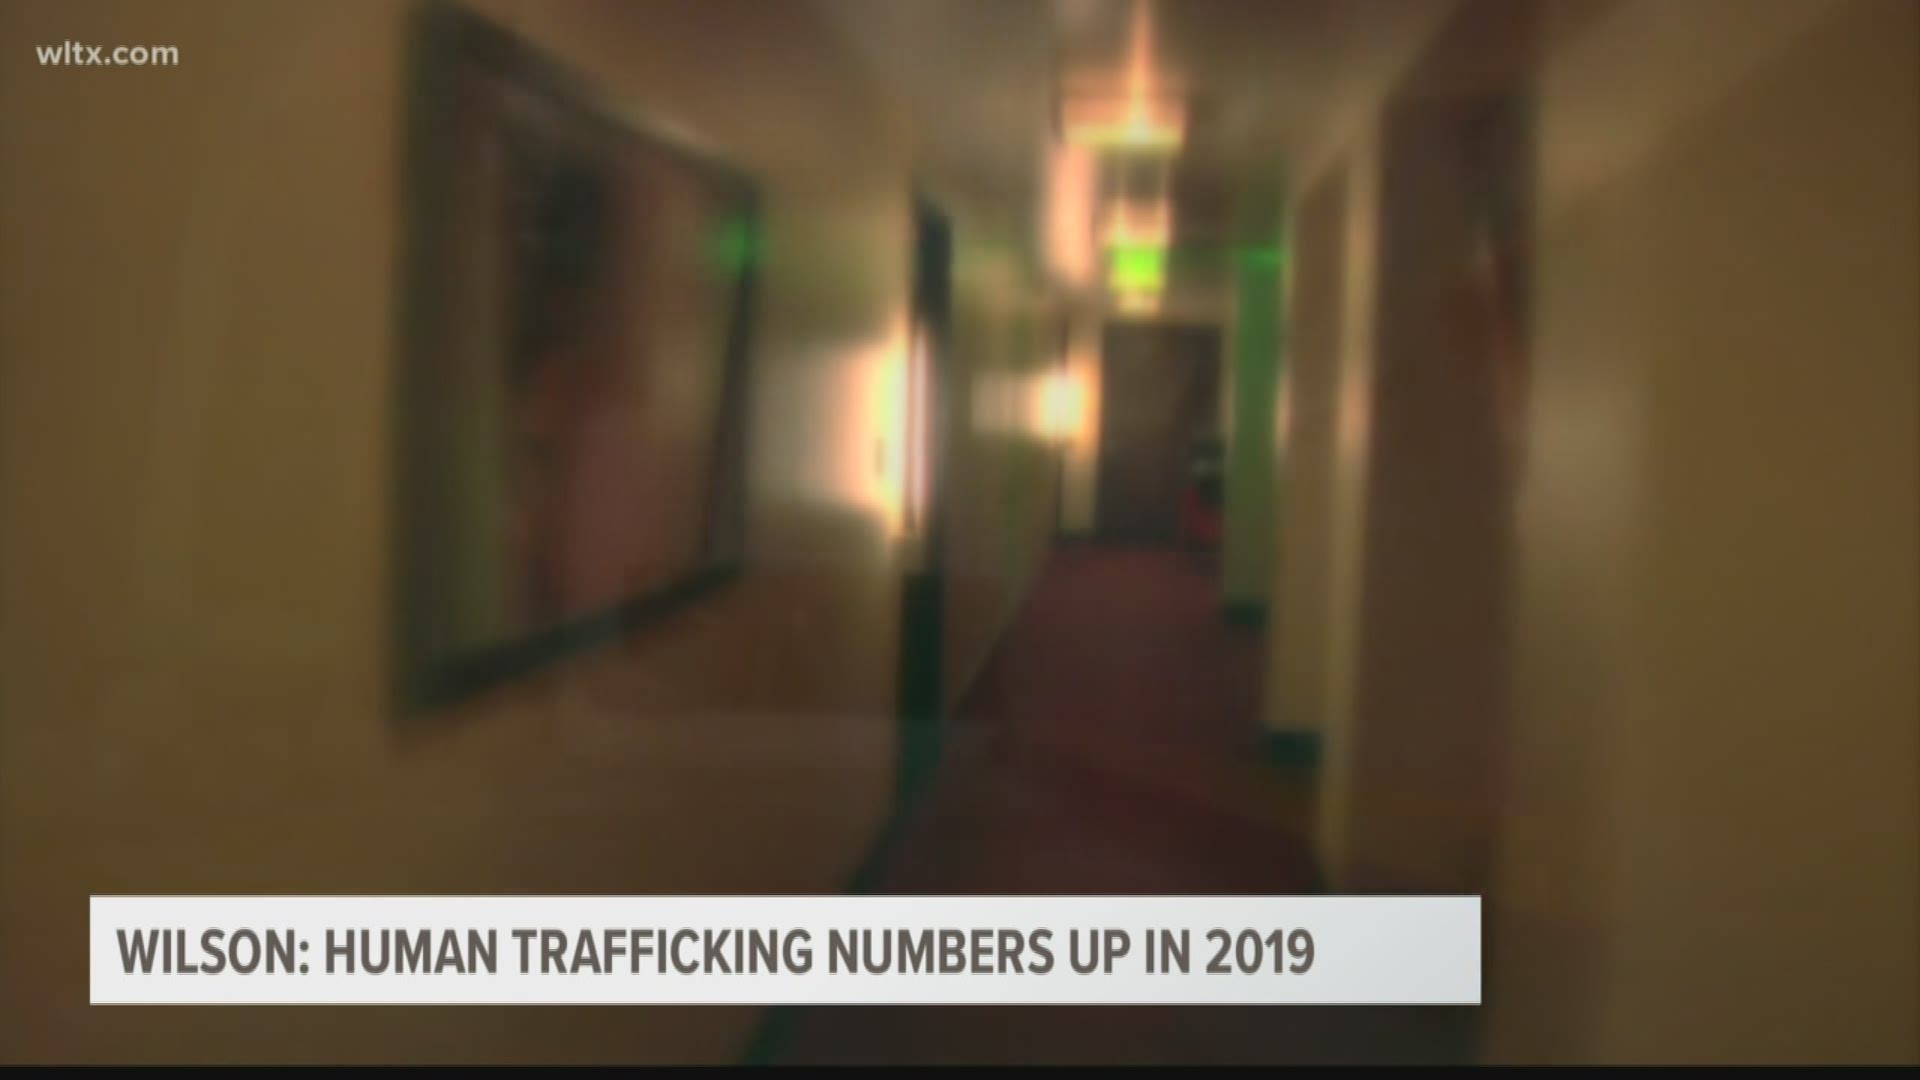 The number of human trafficking cases in South Carolina skyrocketing in 2019, according to newly released numbers. Here's how the state is responding.